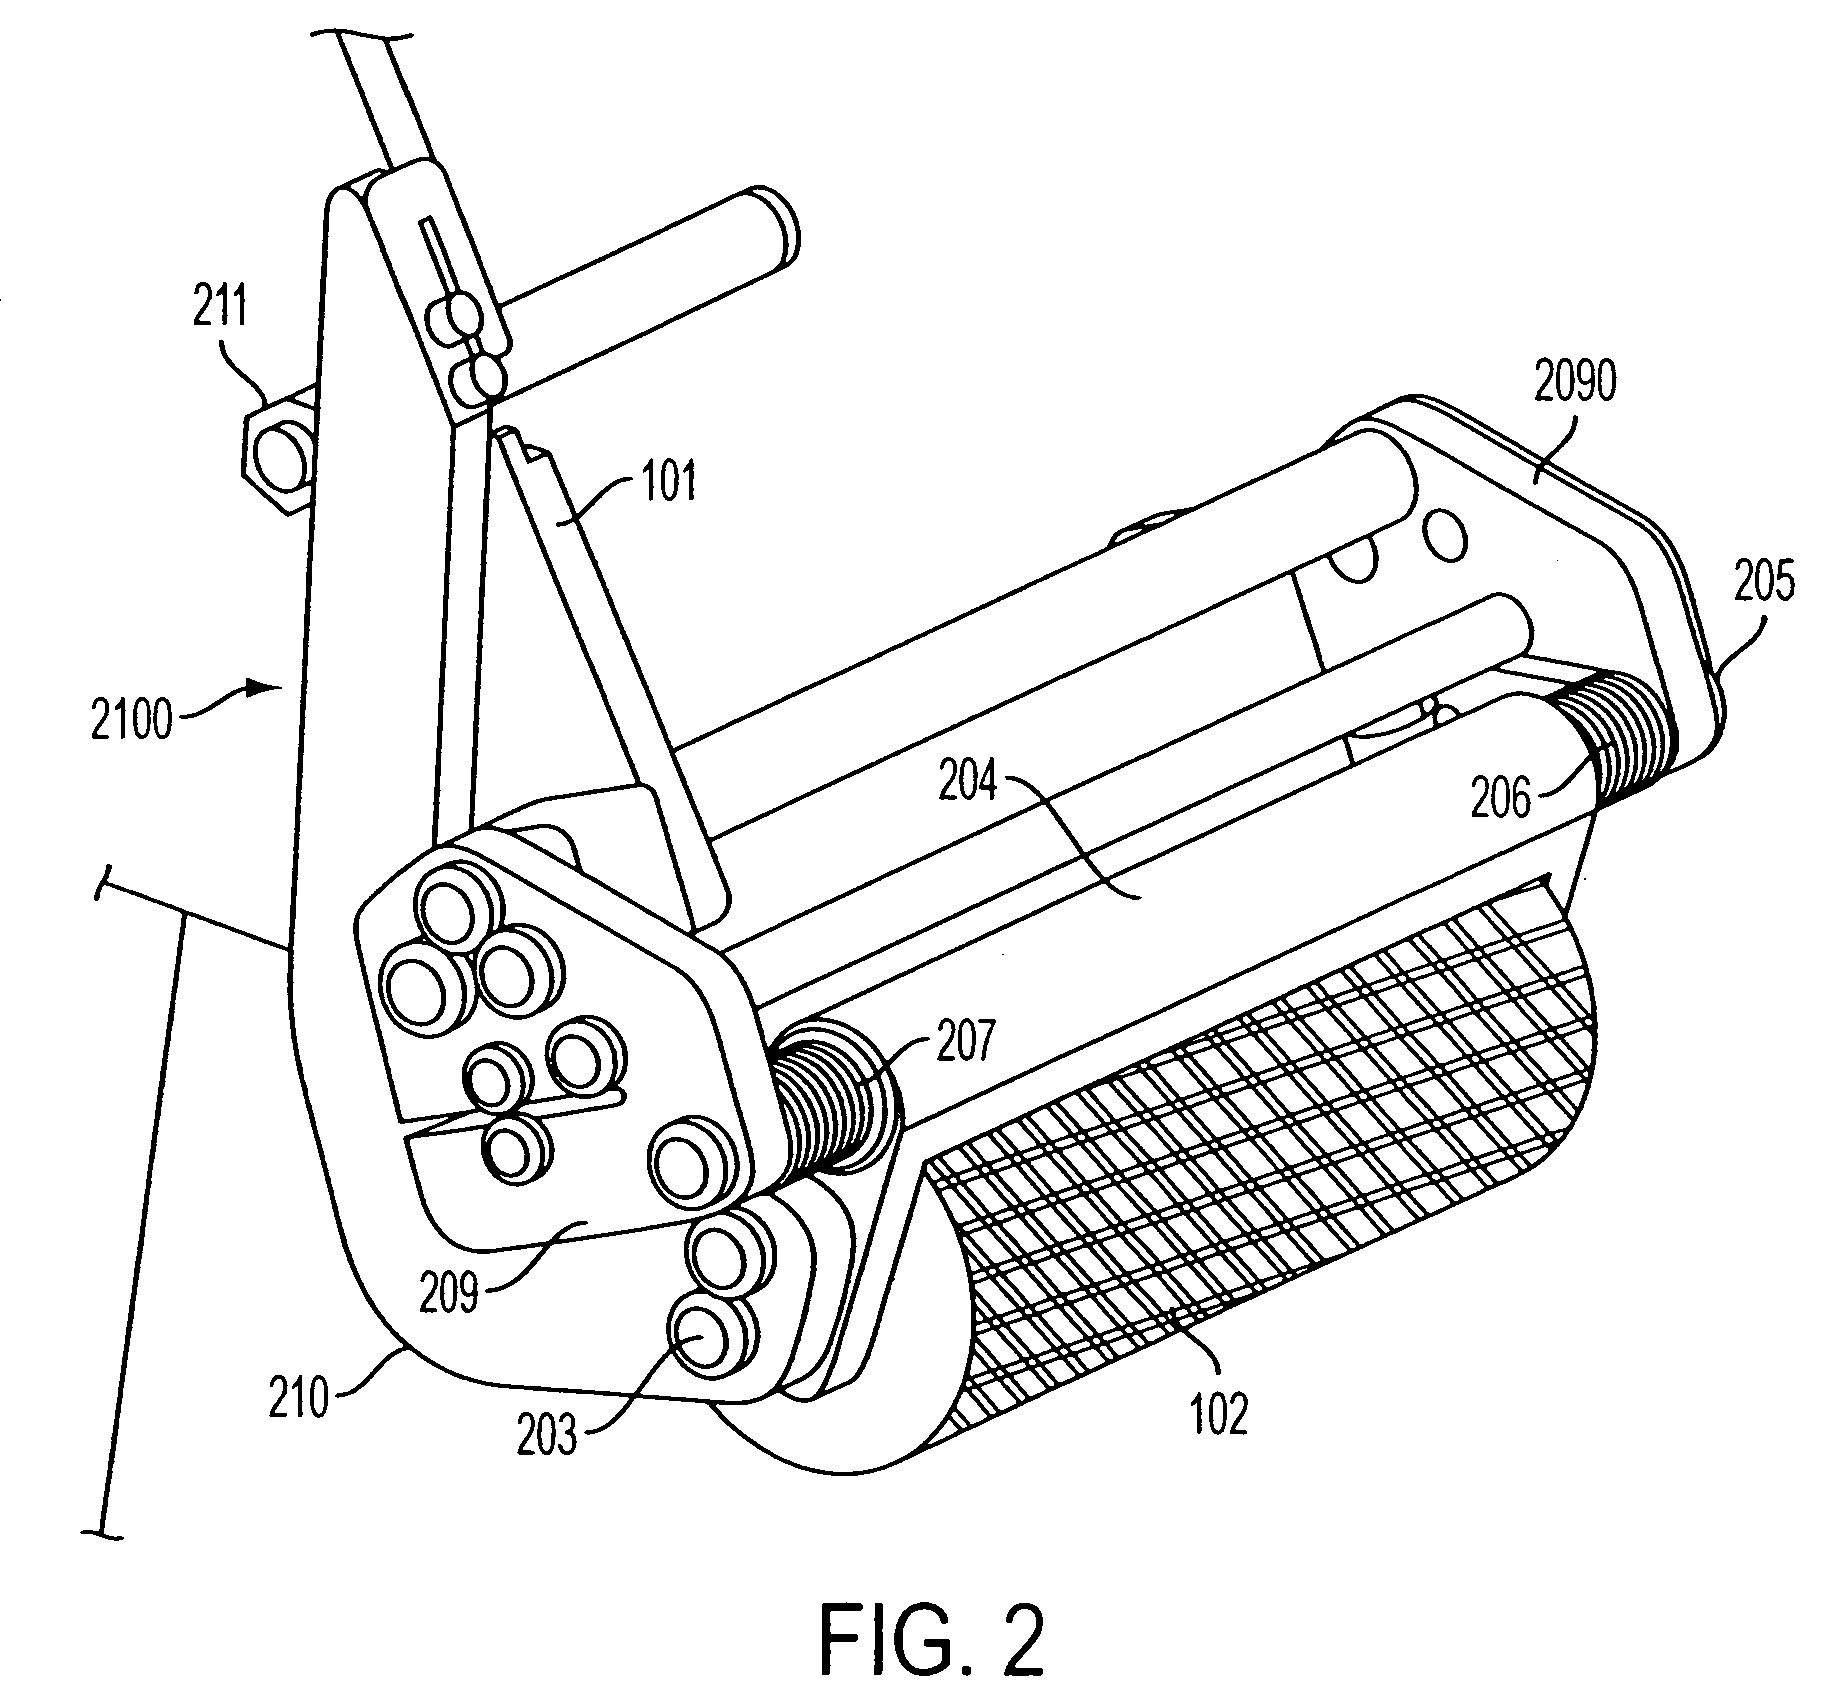 Handheld tape applicator and components thereof, and their methods of use